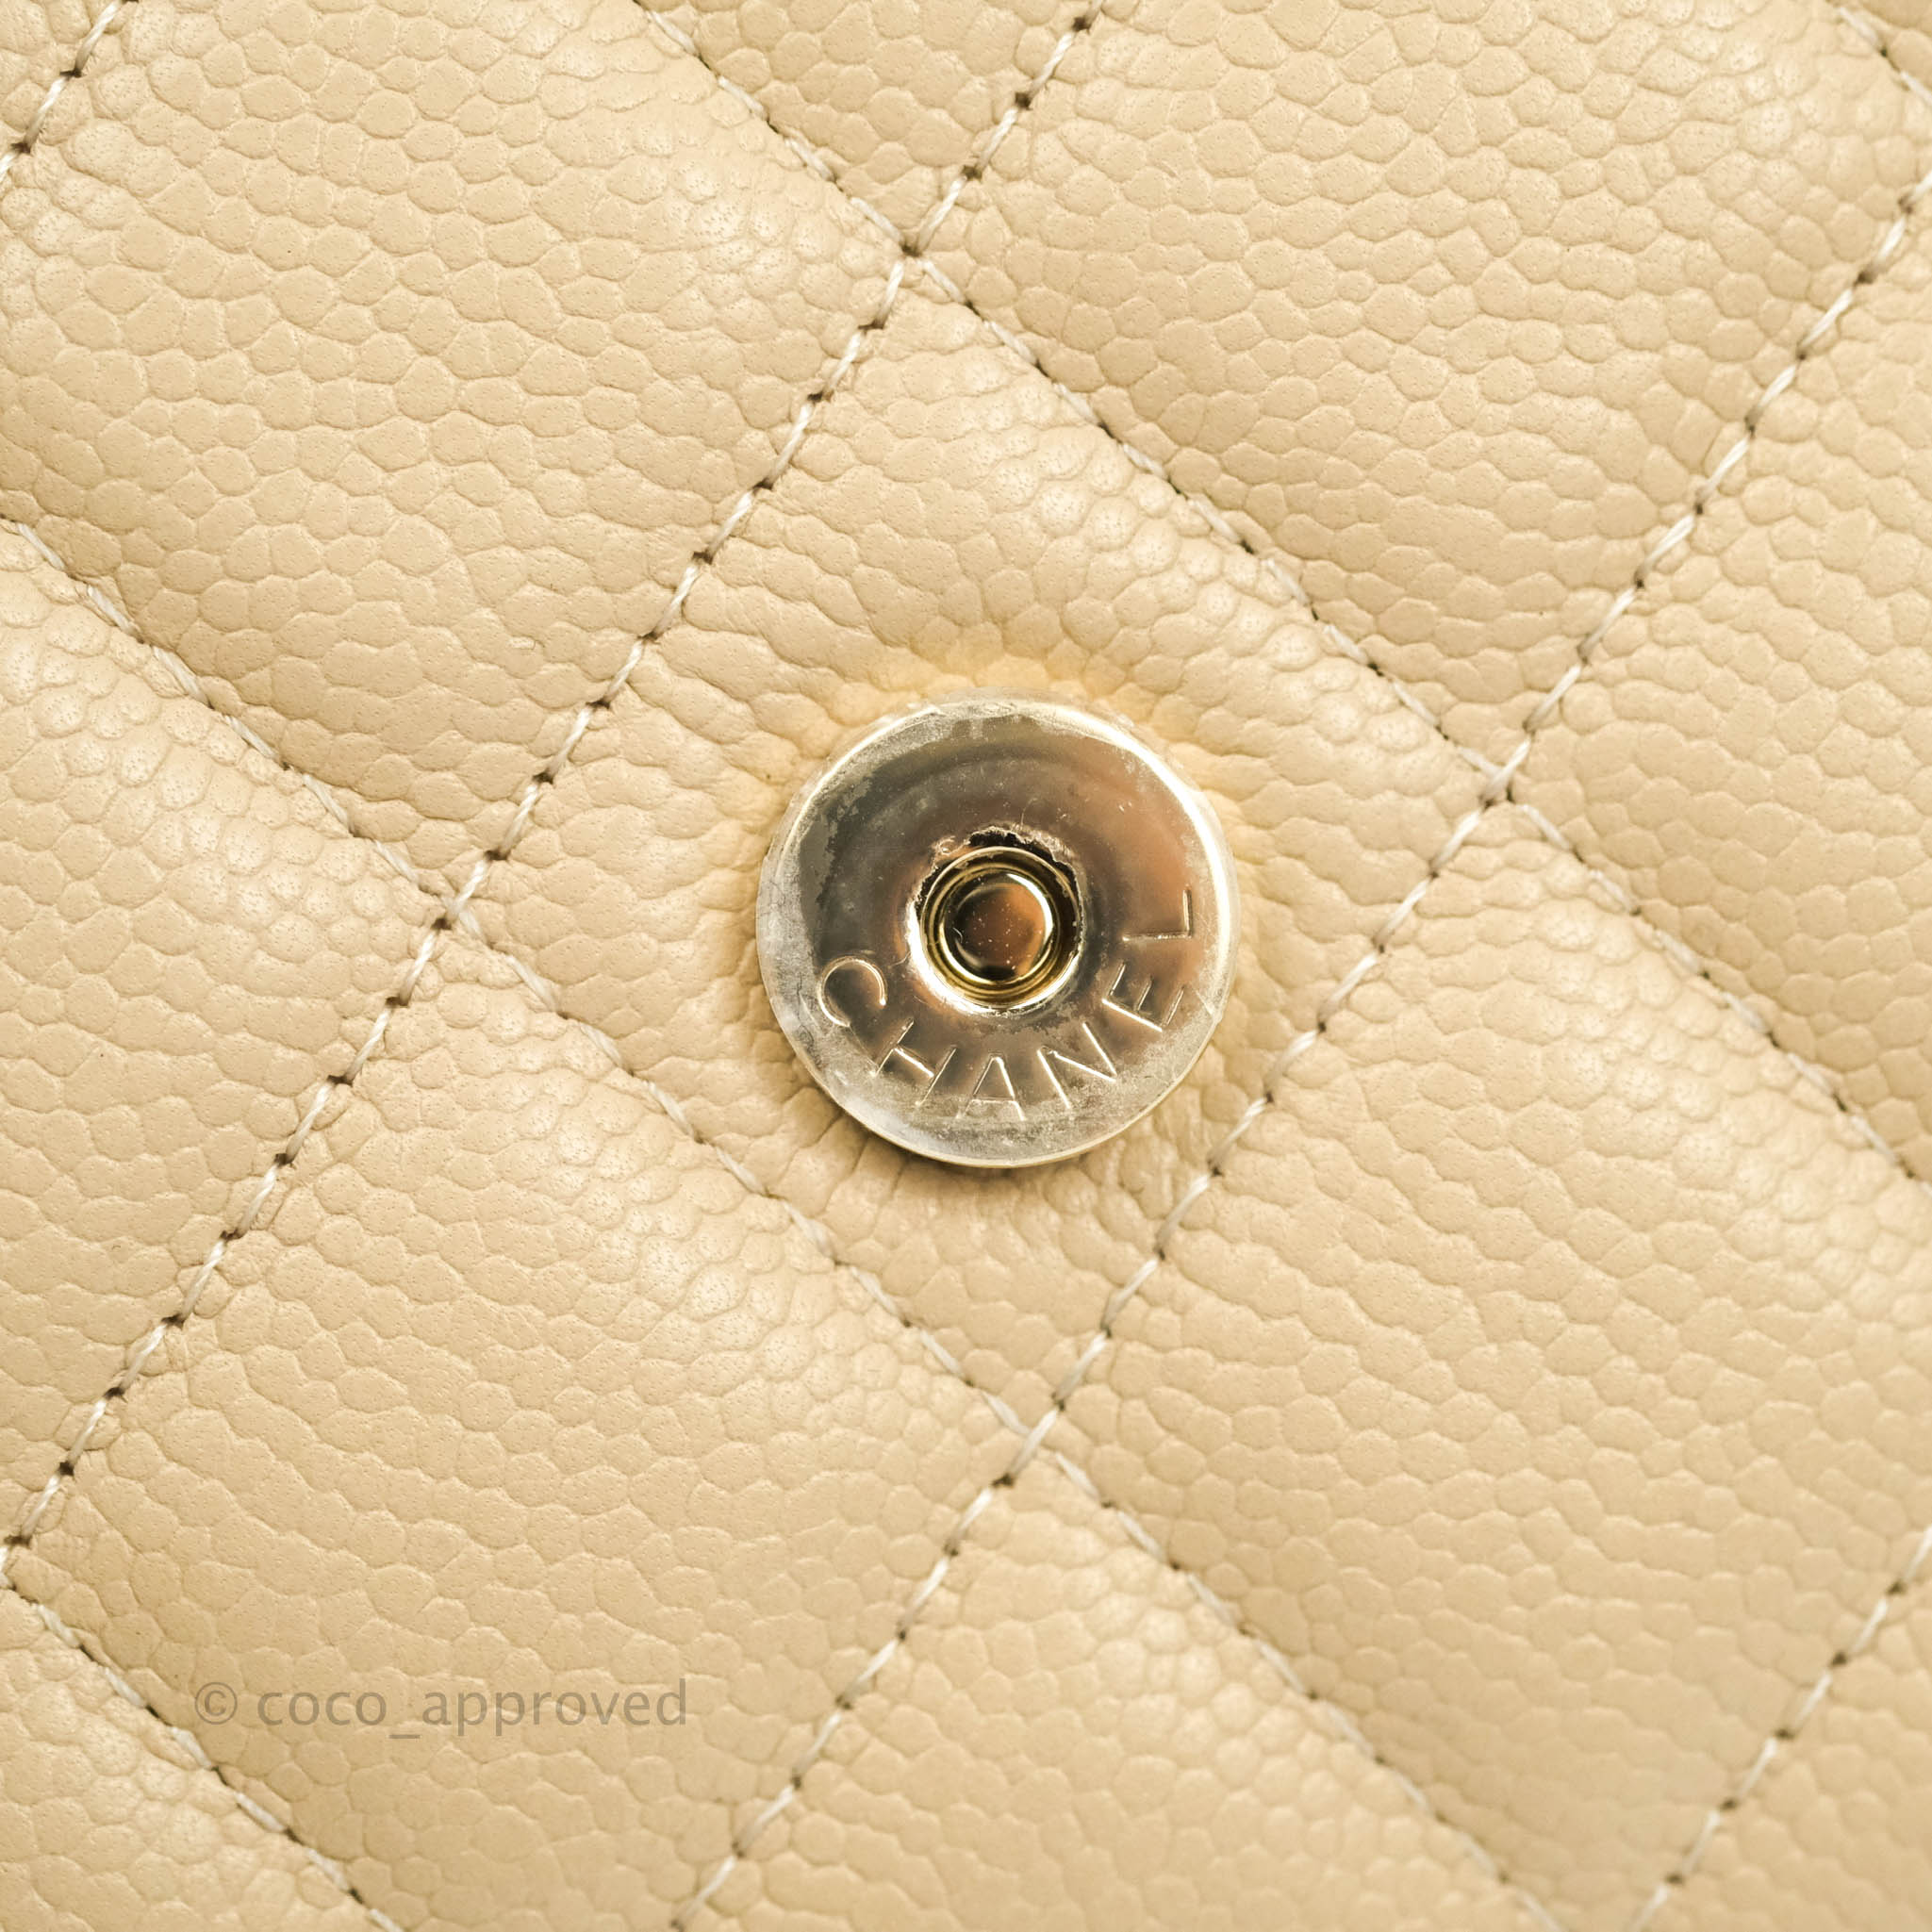 Caviar Quilted Flap Card Holder Wallet Beige – Trends Luxe